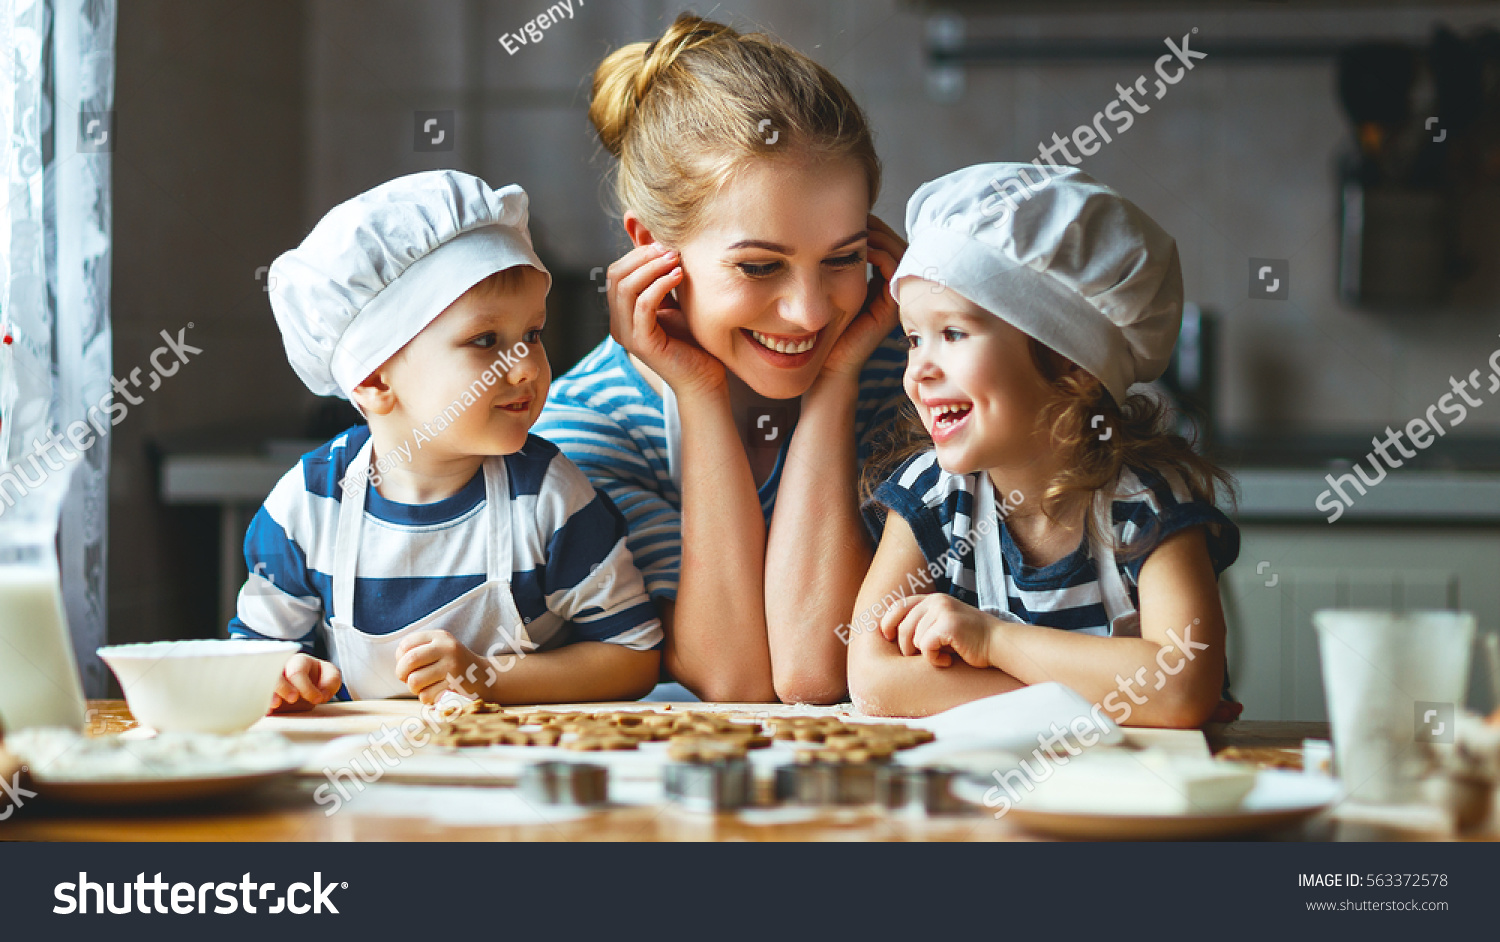 happy family in the kitchen. mother and  children preparing the dough, bake cookies
 #563372578